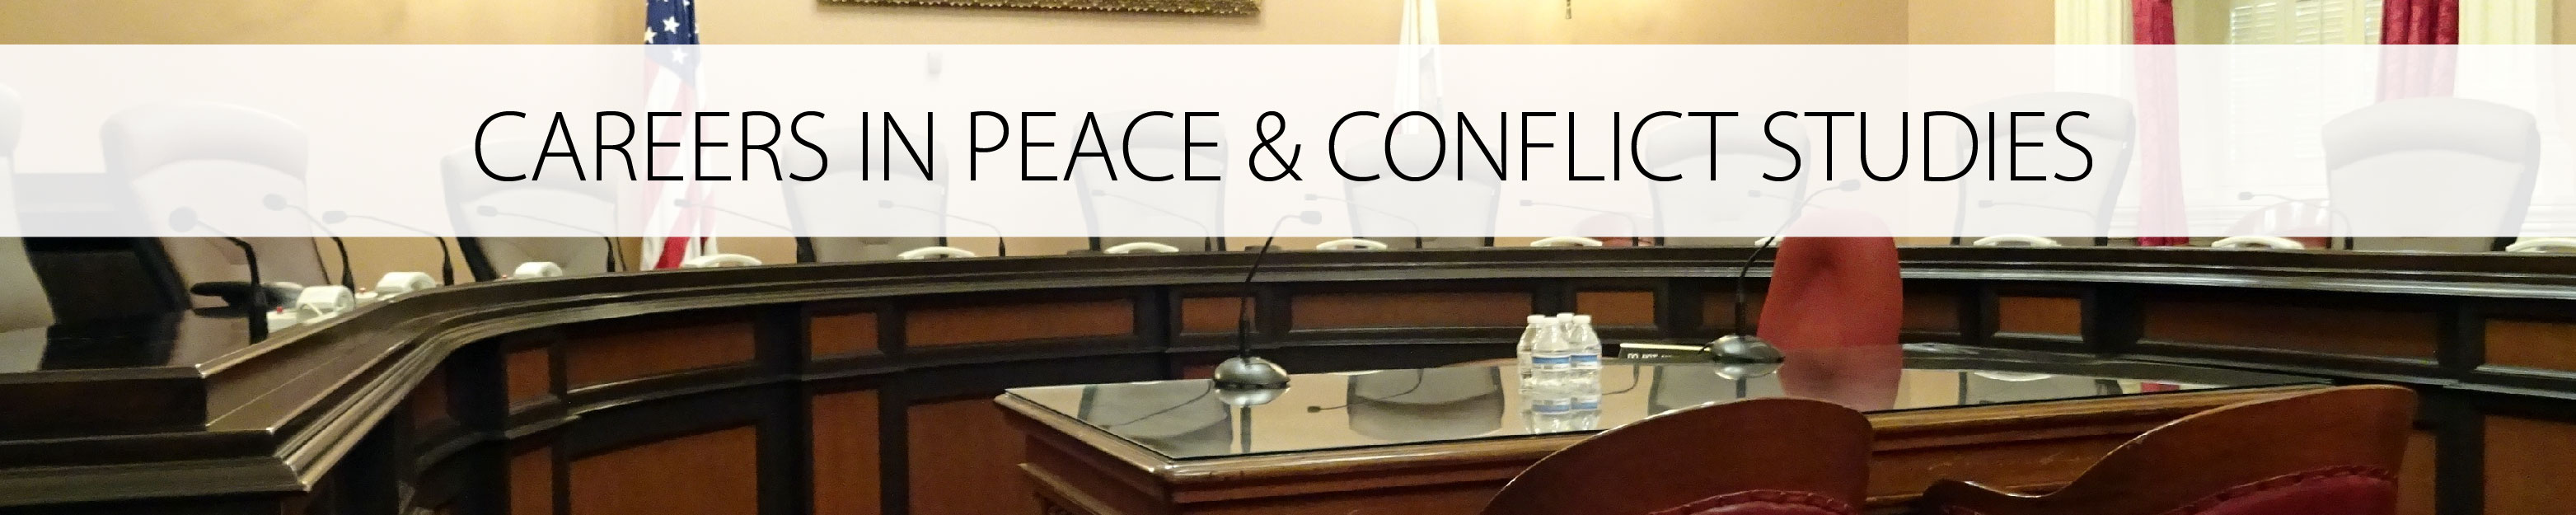 Careers in Peace and Conflict Studies